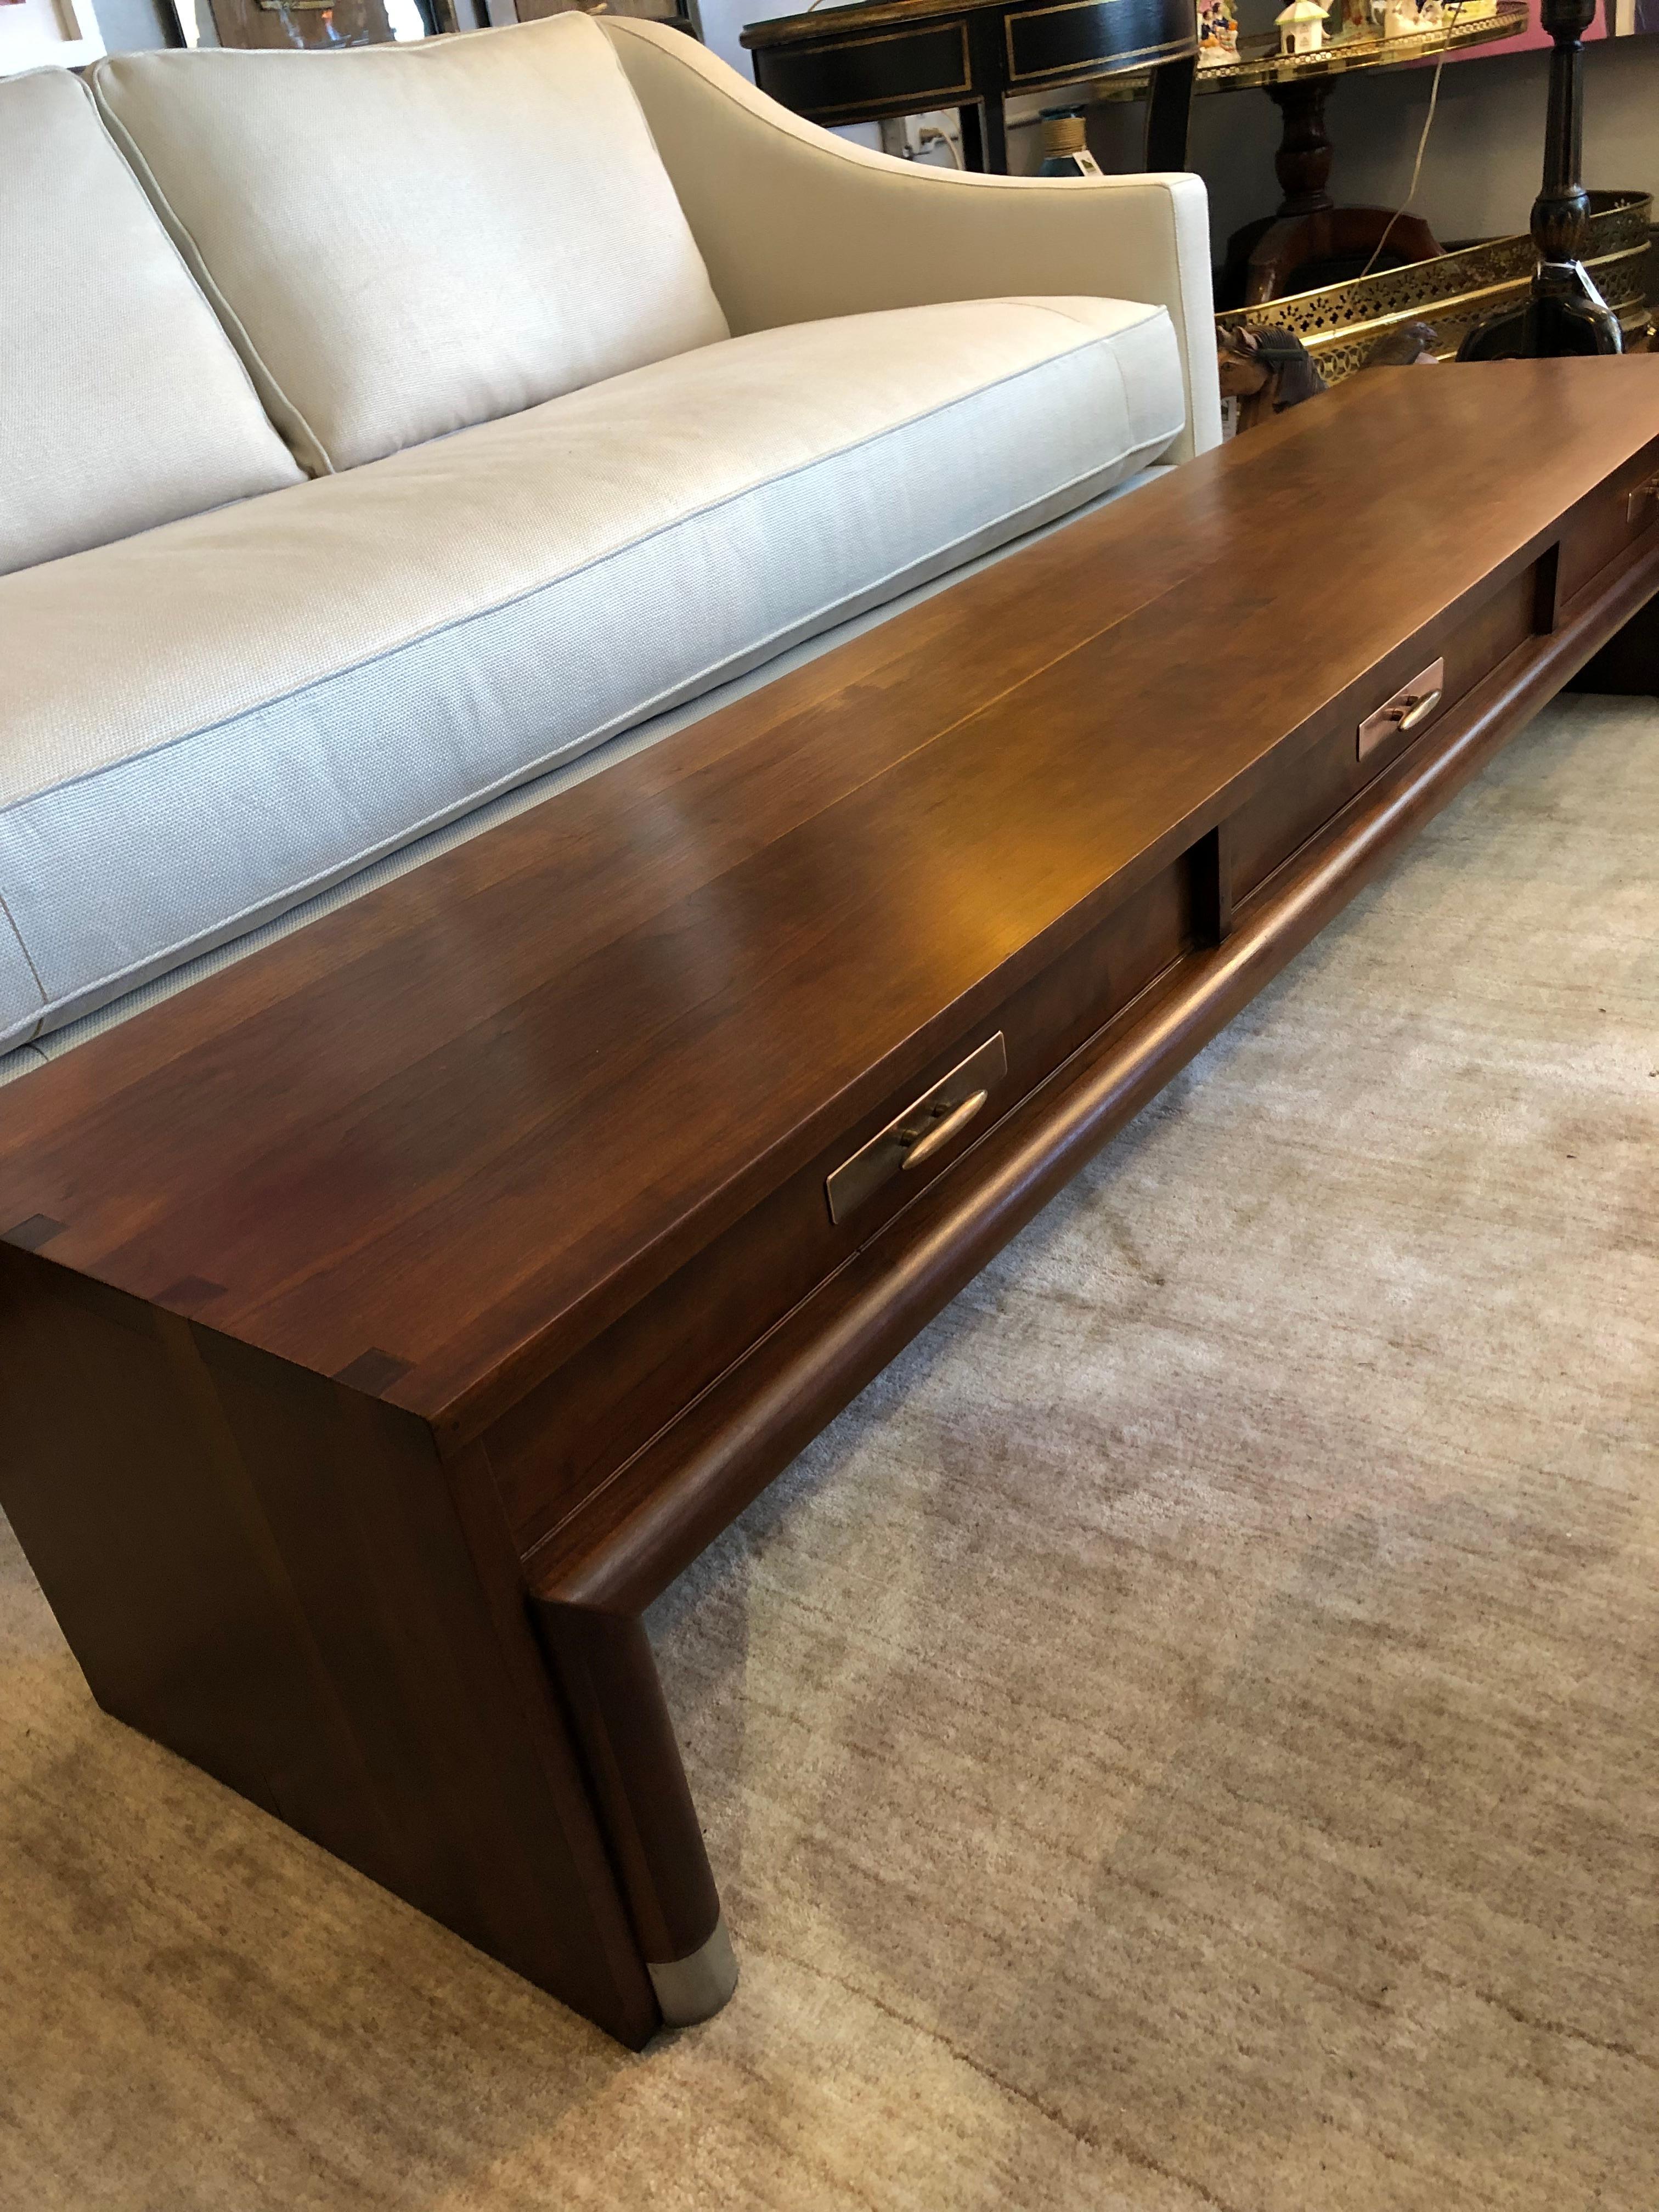 Super chic low slung and very long cherry cocktail table having 3 drawers on one side and stylish copper patina hardware. Gorgeous grain and lustre makes this glamorous piece a focal point.